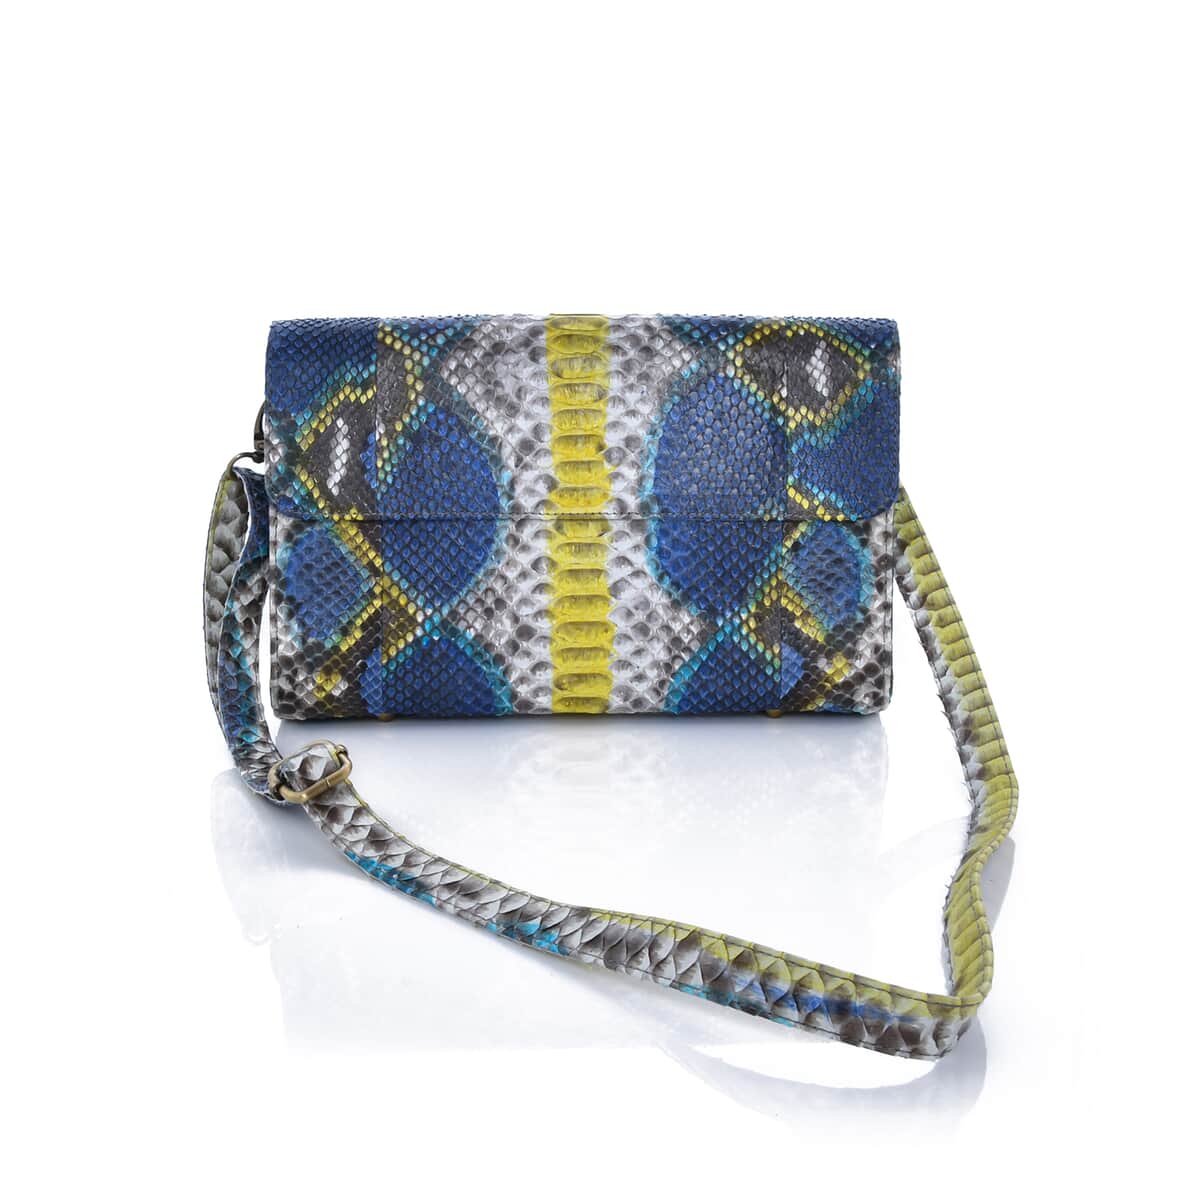 The Pelle Collection Peacock Blue Python Leather Evening Clutch Bag with Detachable Strap, Clutches for Women, Leather Handbag, Clutch Purse image number 4